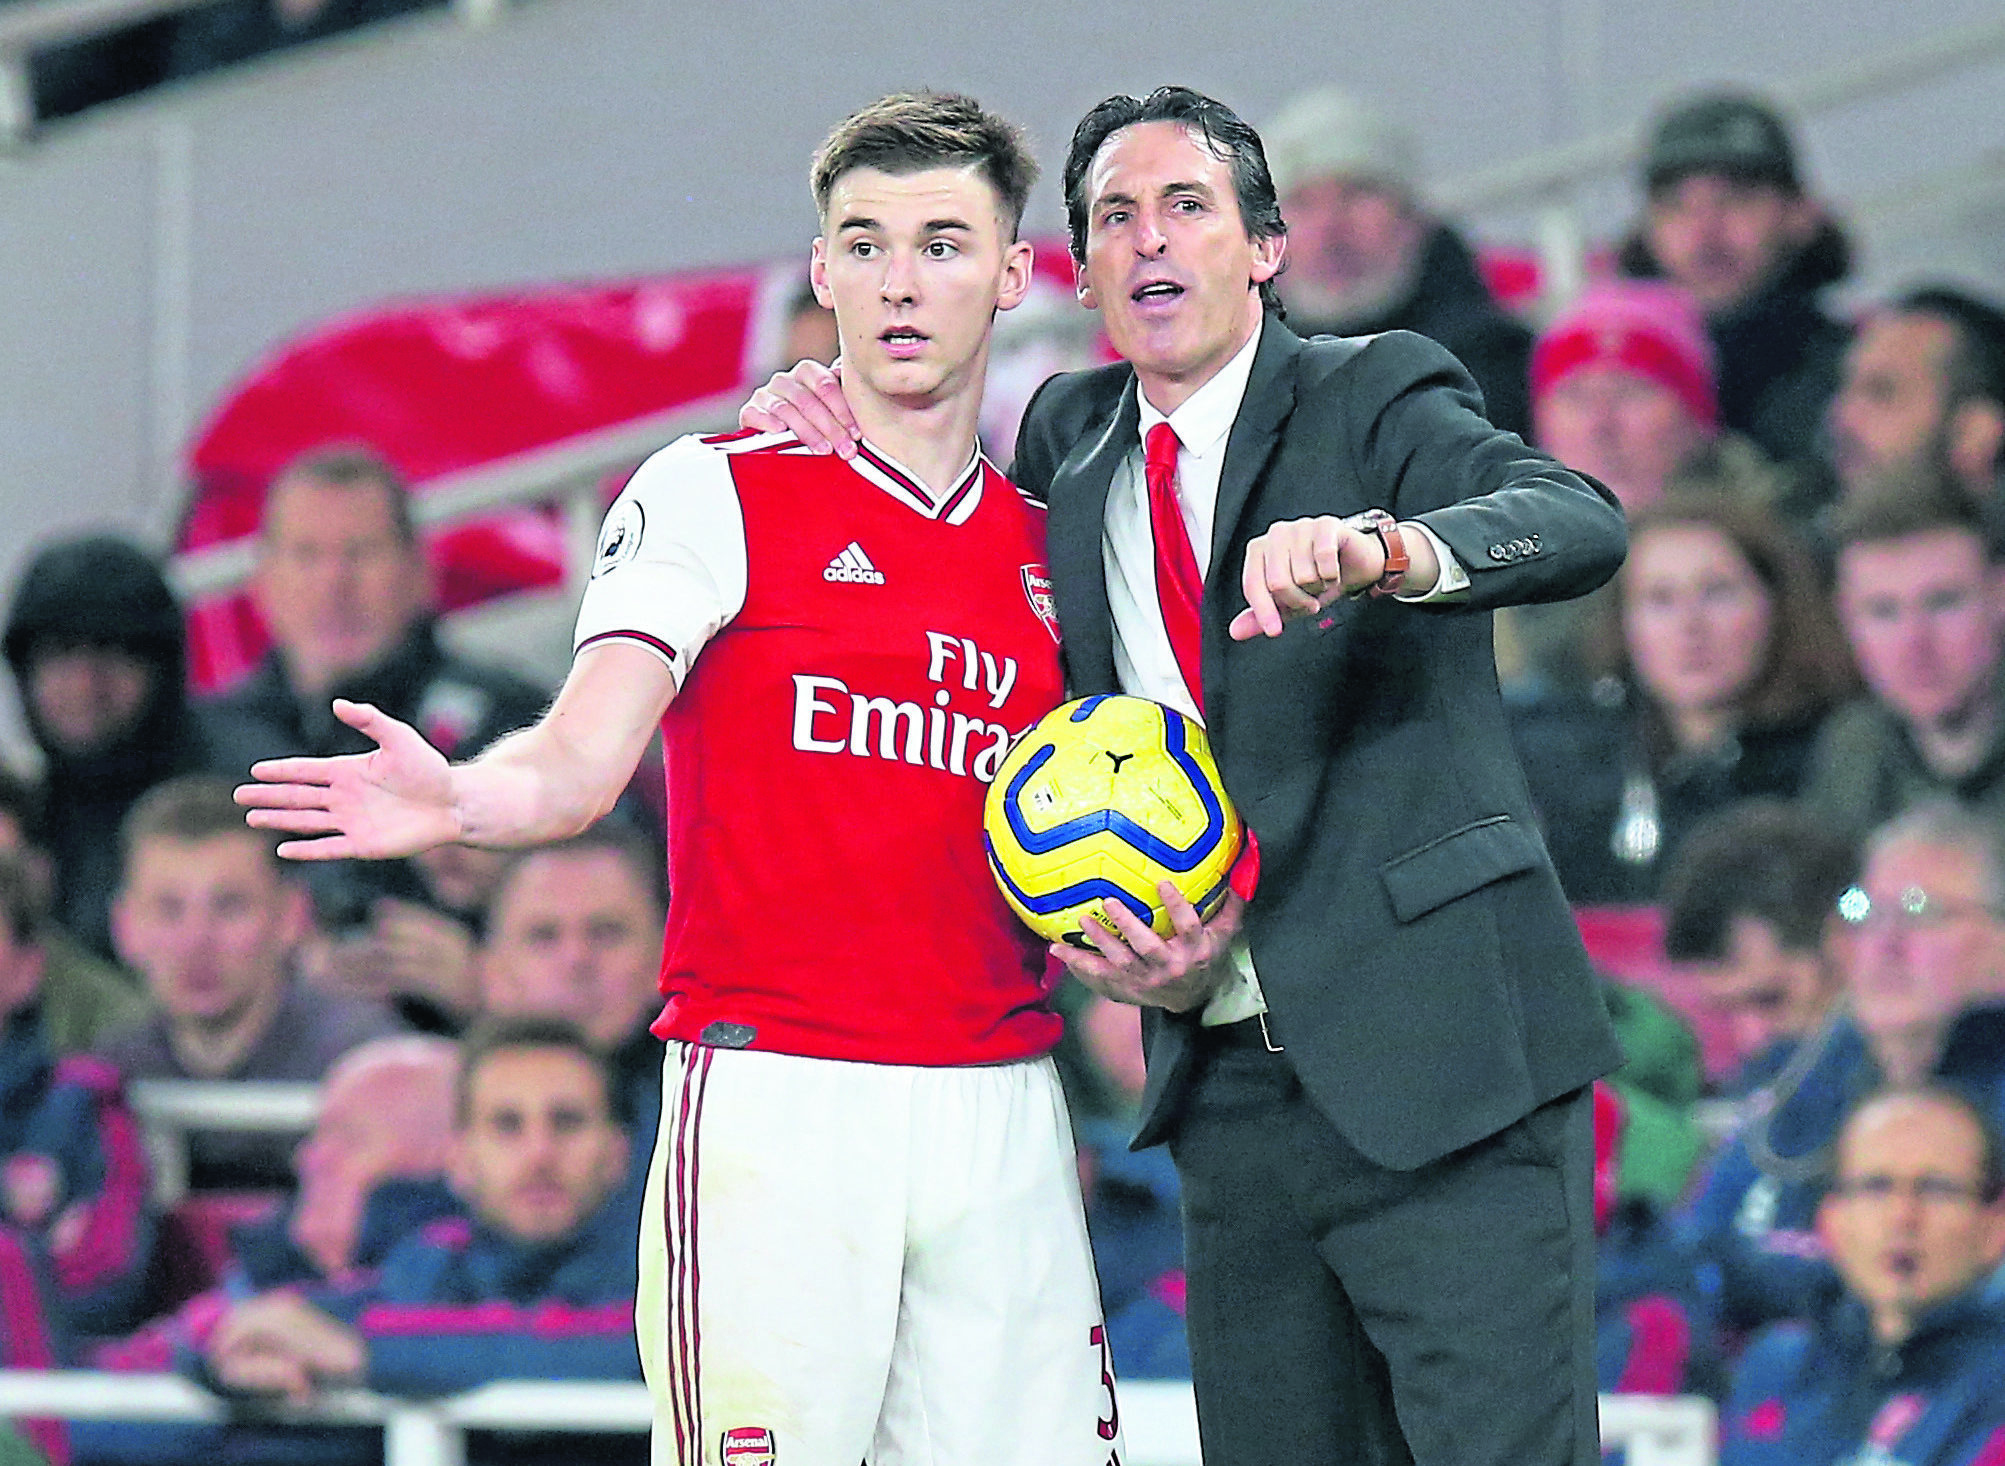 Arsenal manager Unai Emery holds the match ball and talks to Kieran Tierney during the Premier League match between Arsenal FC and Southampton FC at Emirates Stadium on November 23, 2019 in London, United Kingdom.